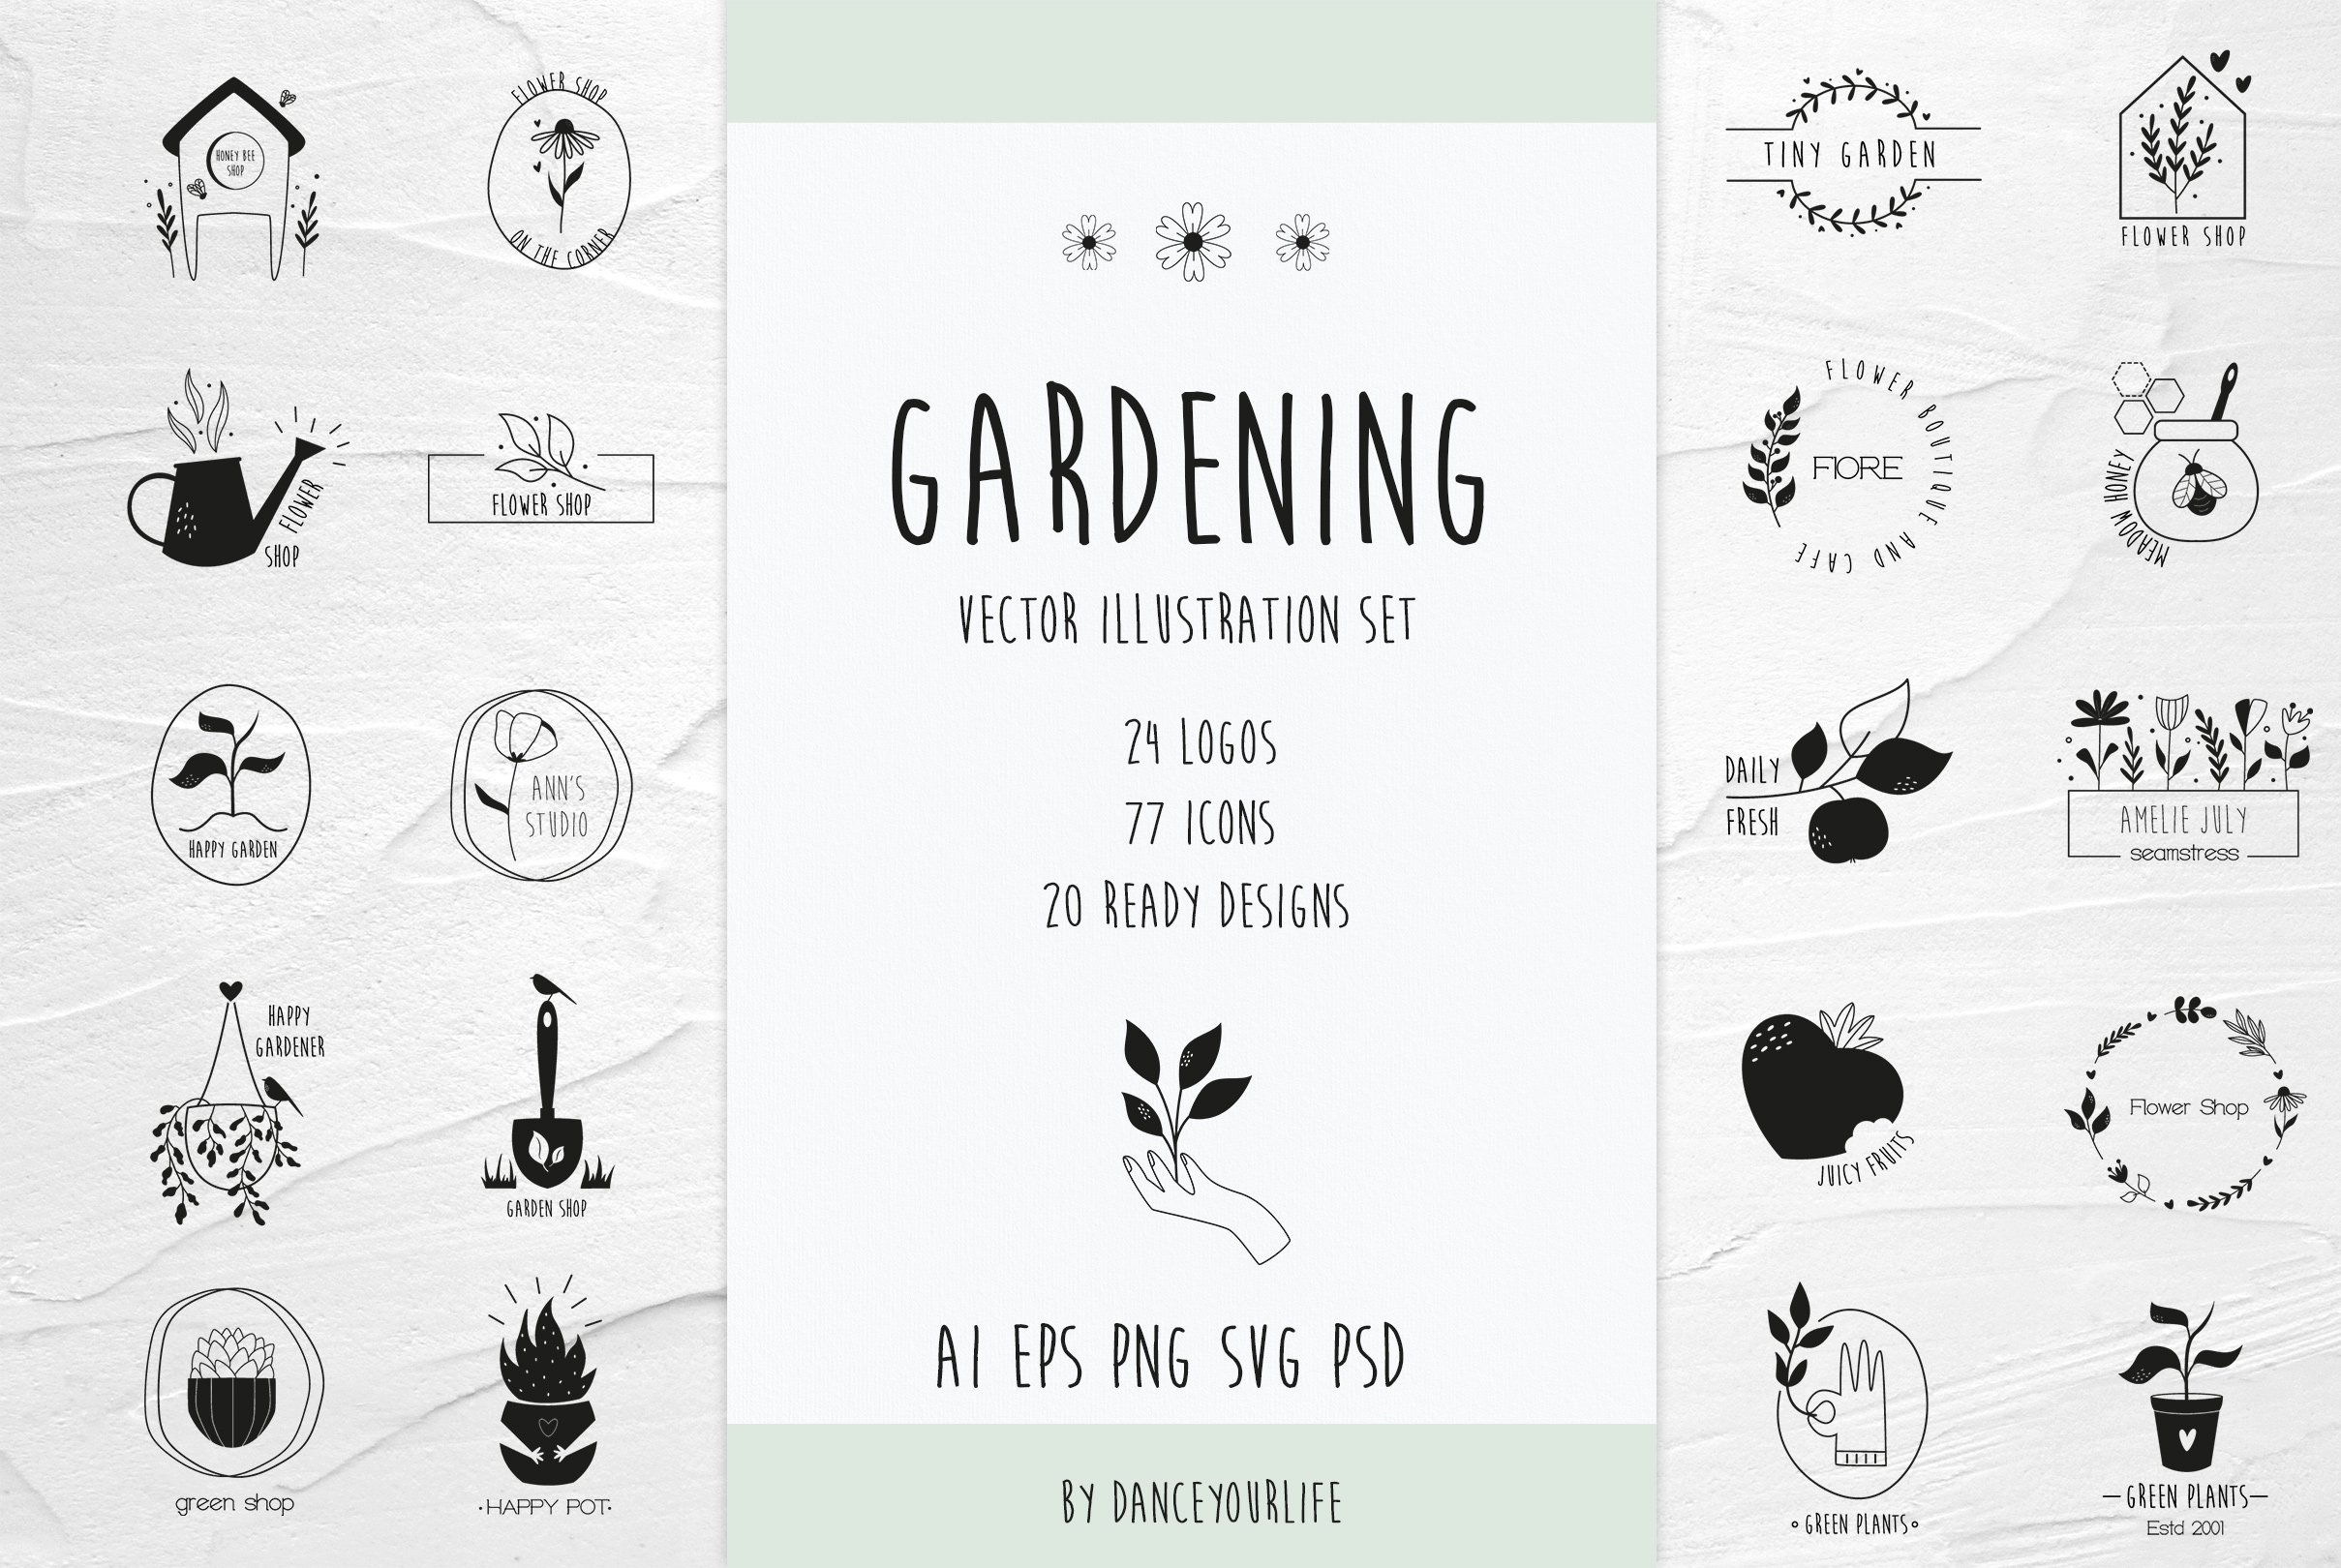 Gardening & Floral Logos Collection cover image.